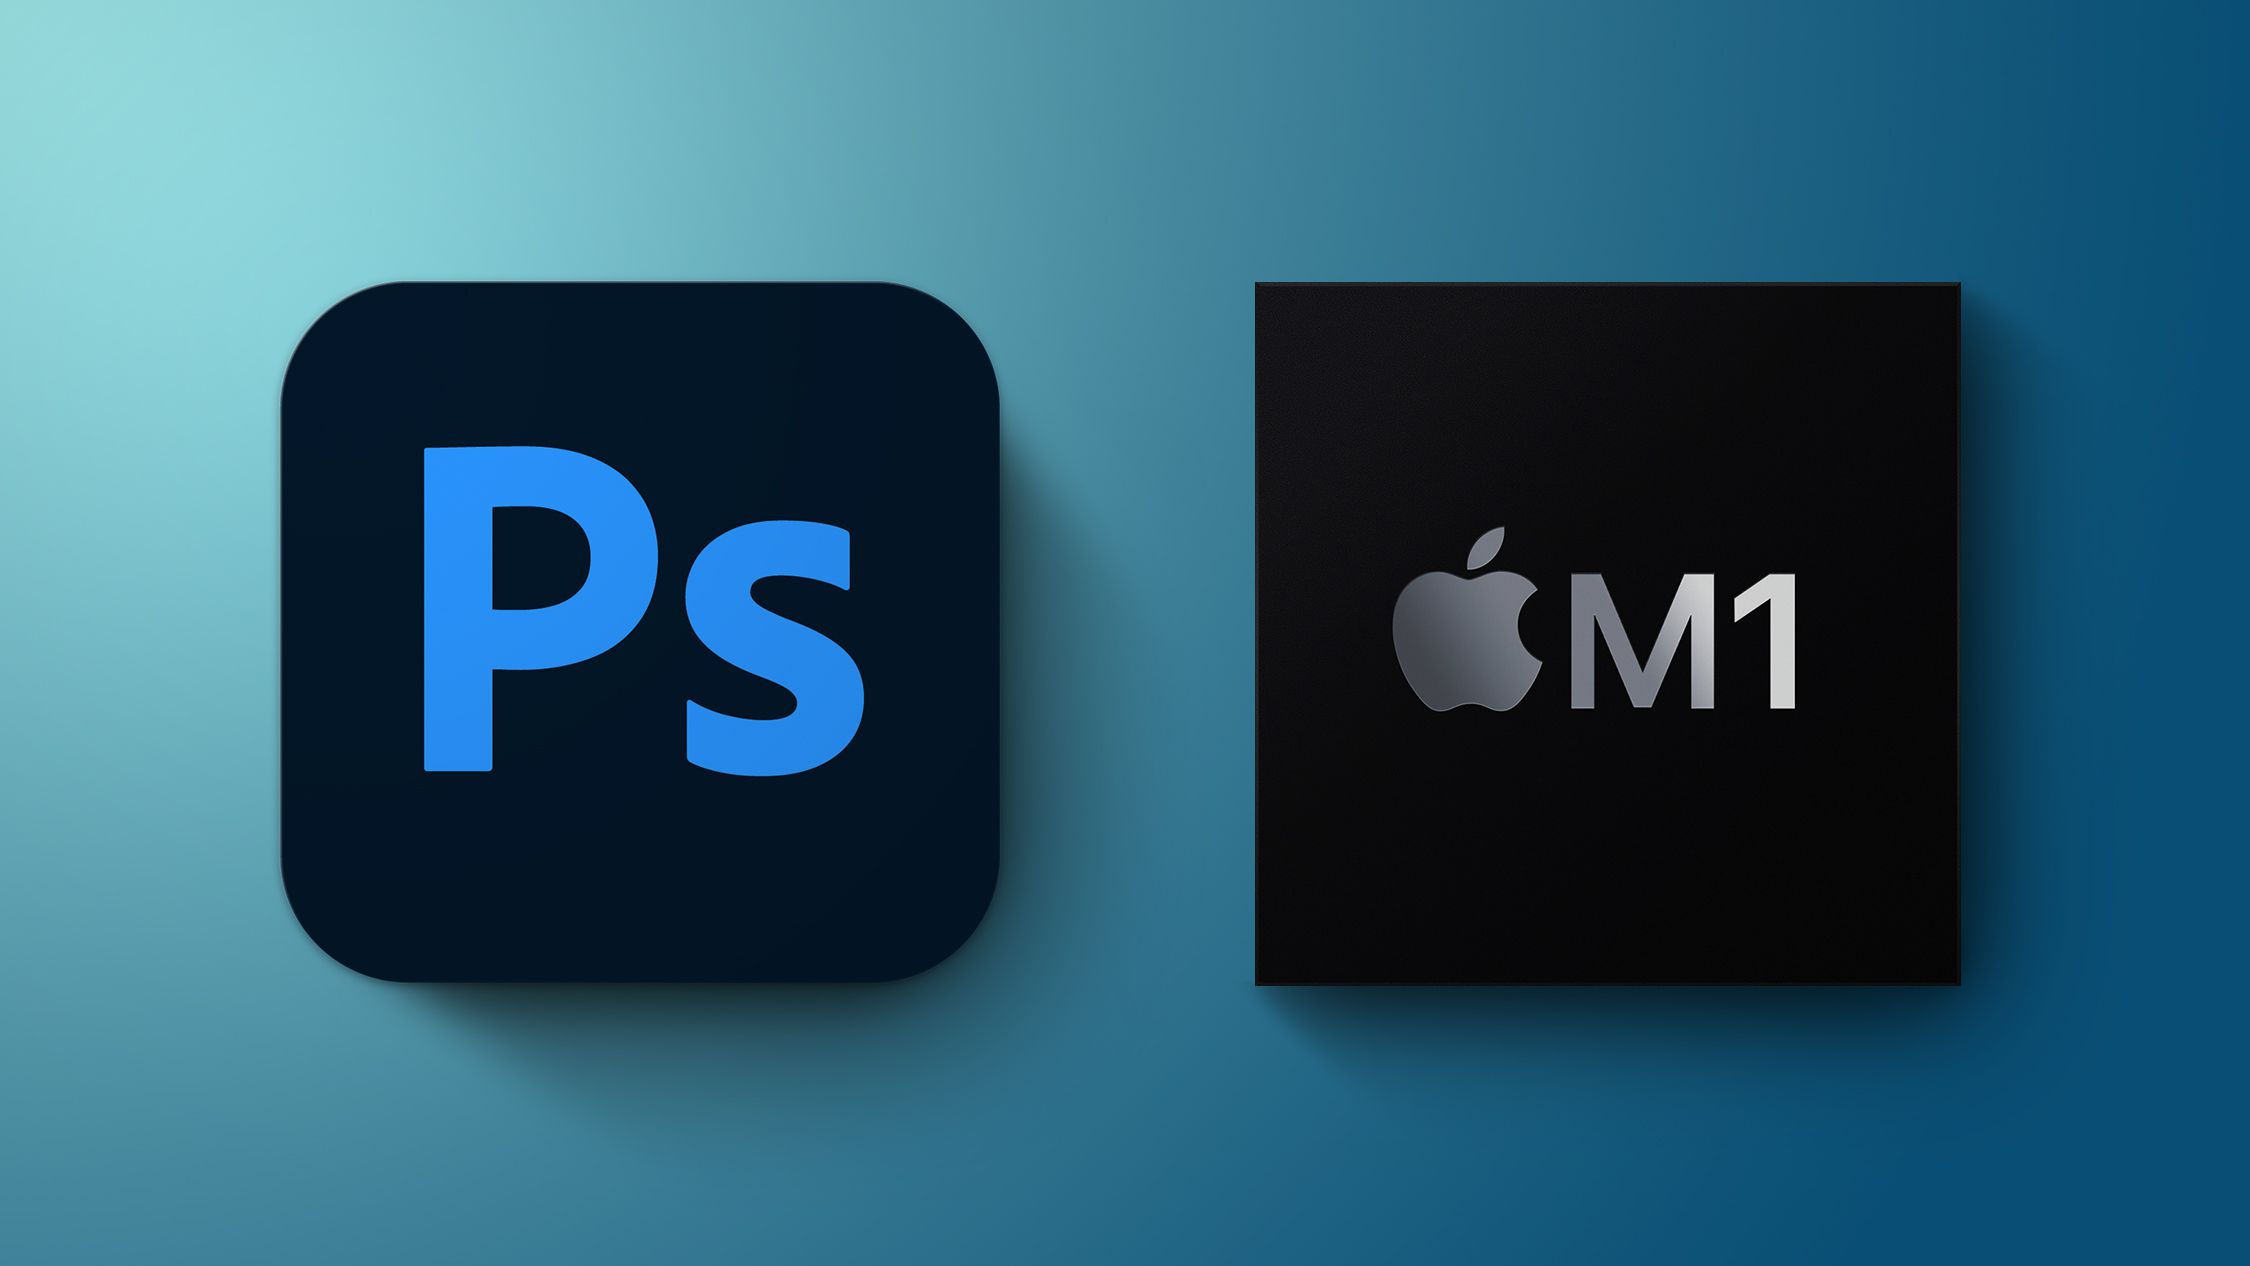 Adobe claims that Photoshop on M1 is 50% faster than the 2019 Intel MacBook